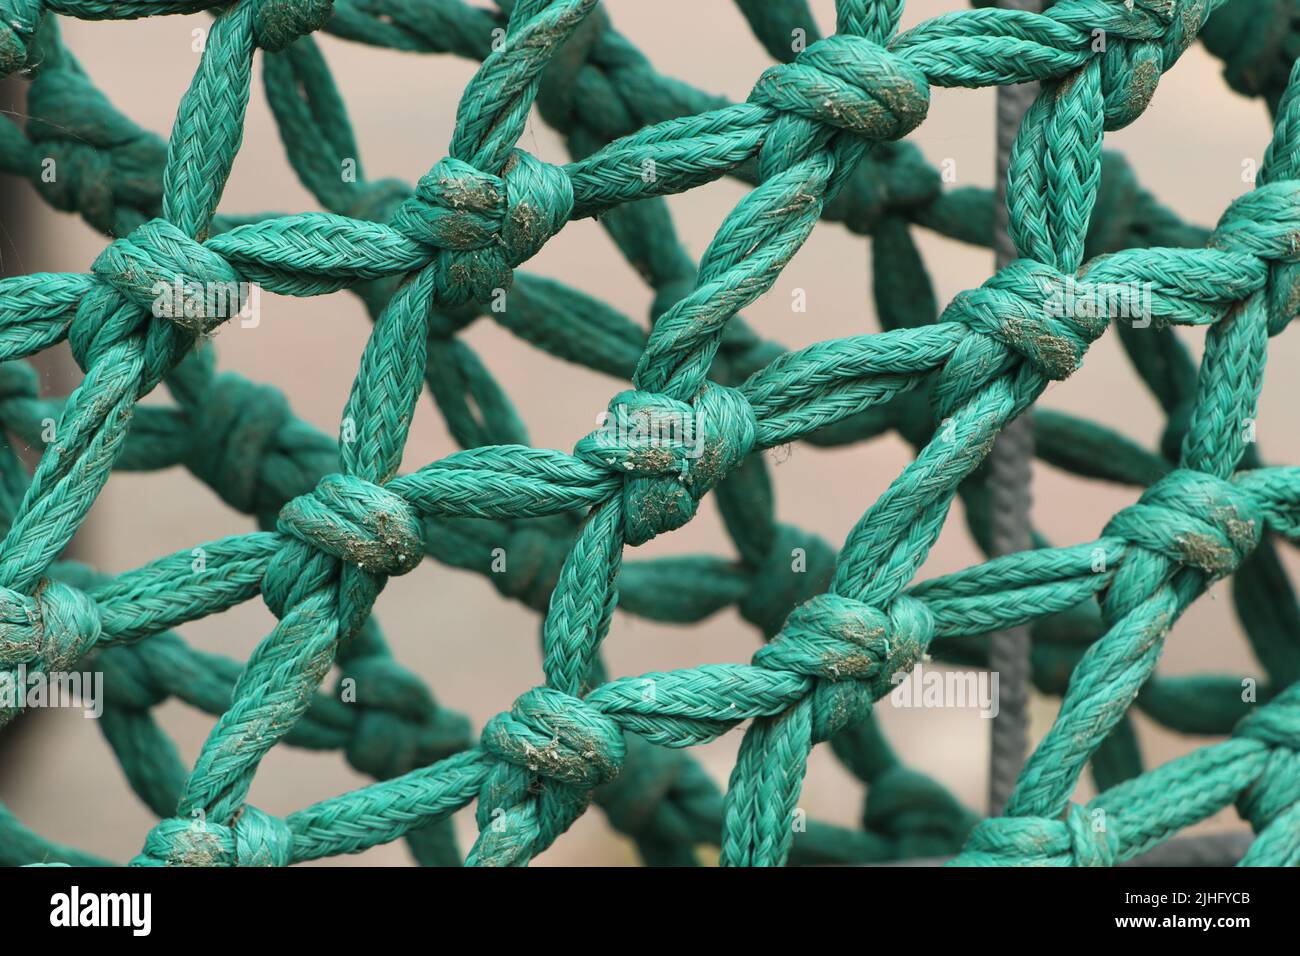 knots in turquoise colored fishing net rope close up Stock Photo